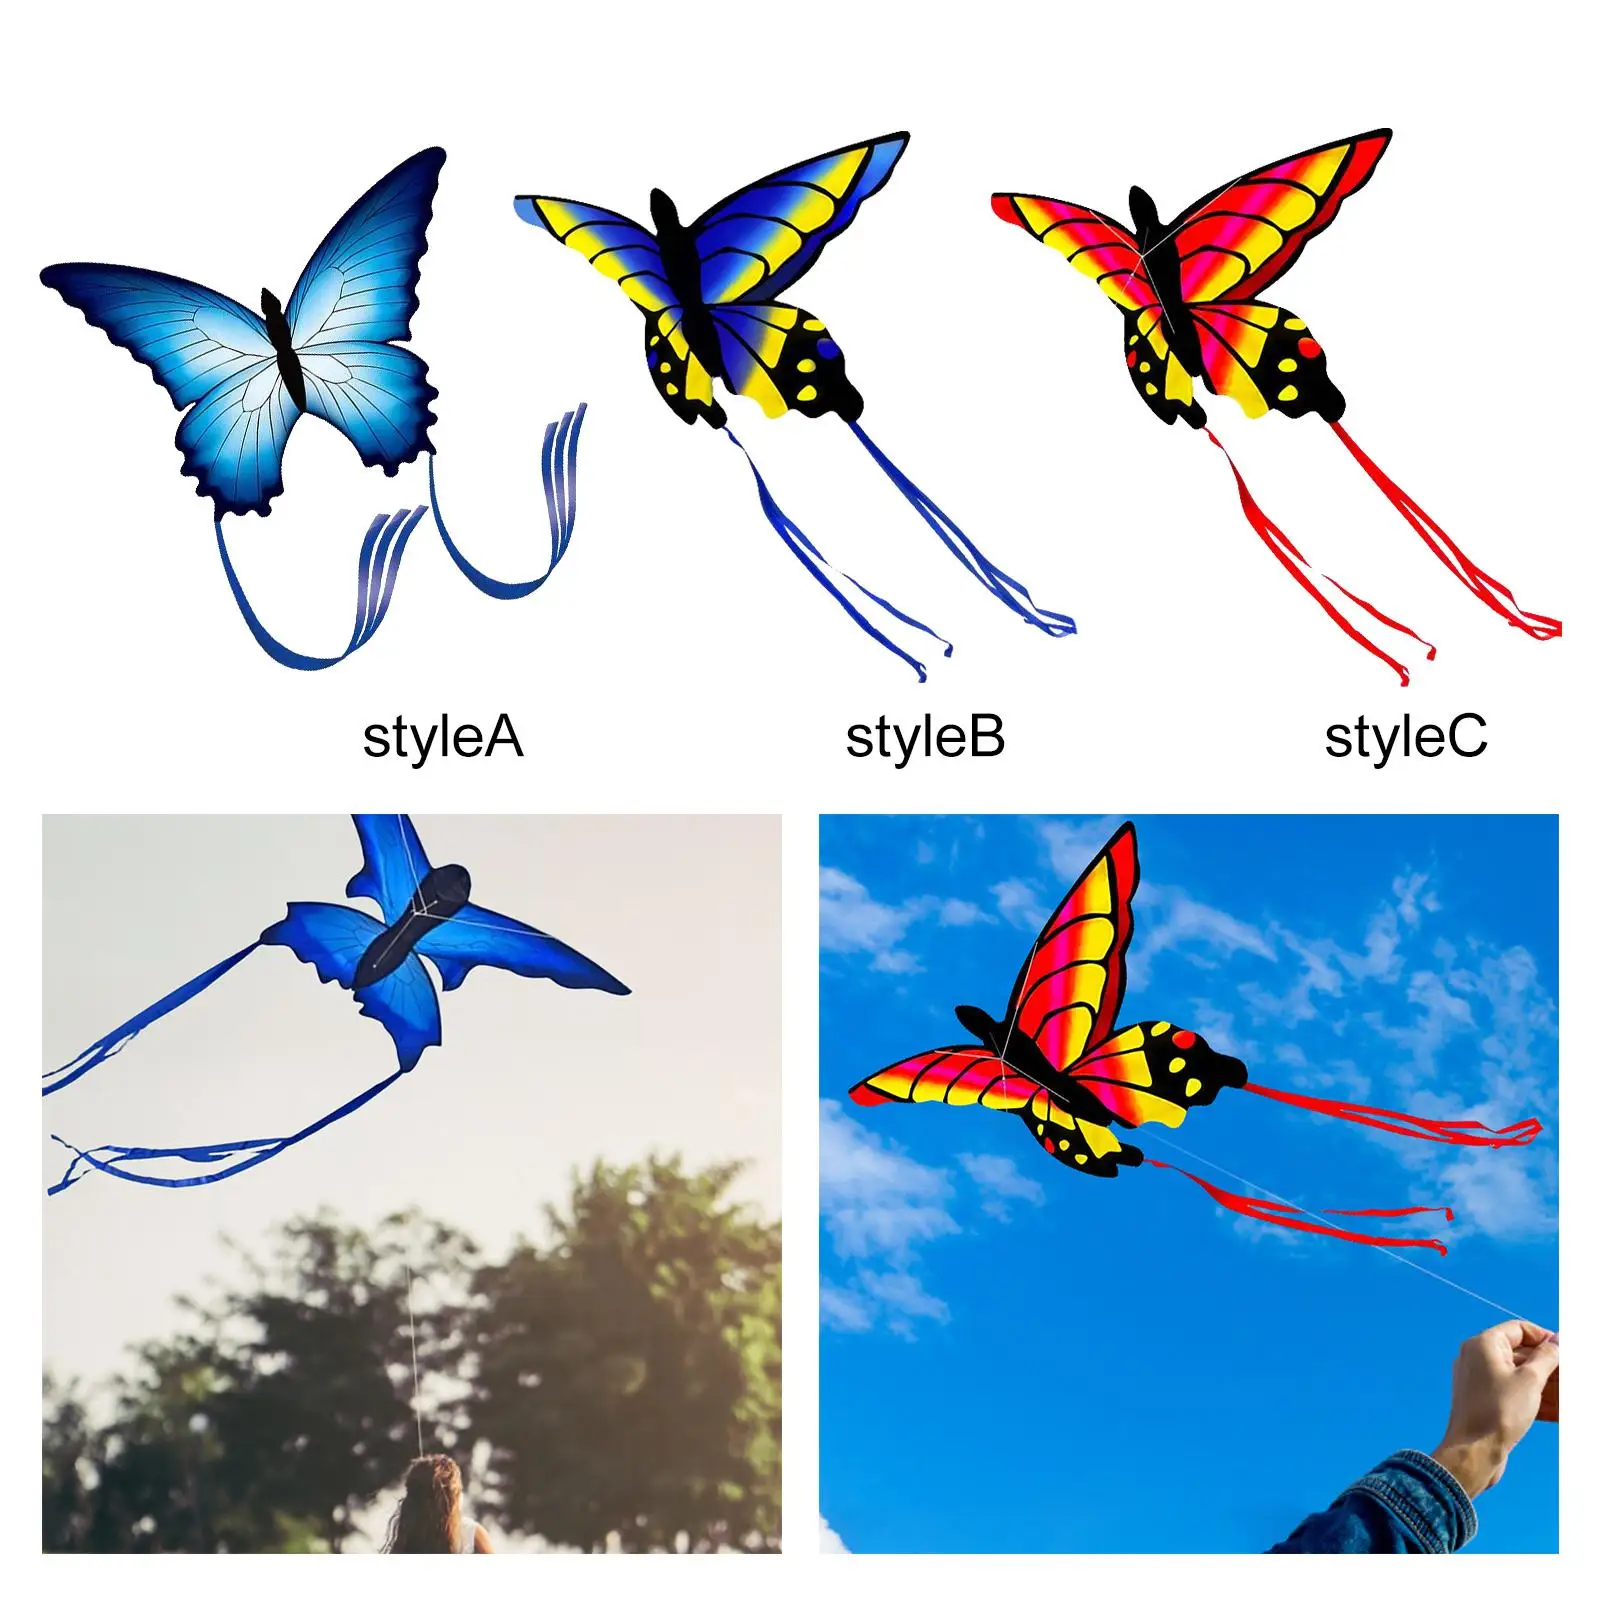 Funny Kites Outdoor Toys, Flying Game, Playing Games, Beach Park Activity, Colorful Easy , for Adults Children Kids Gifts